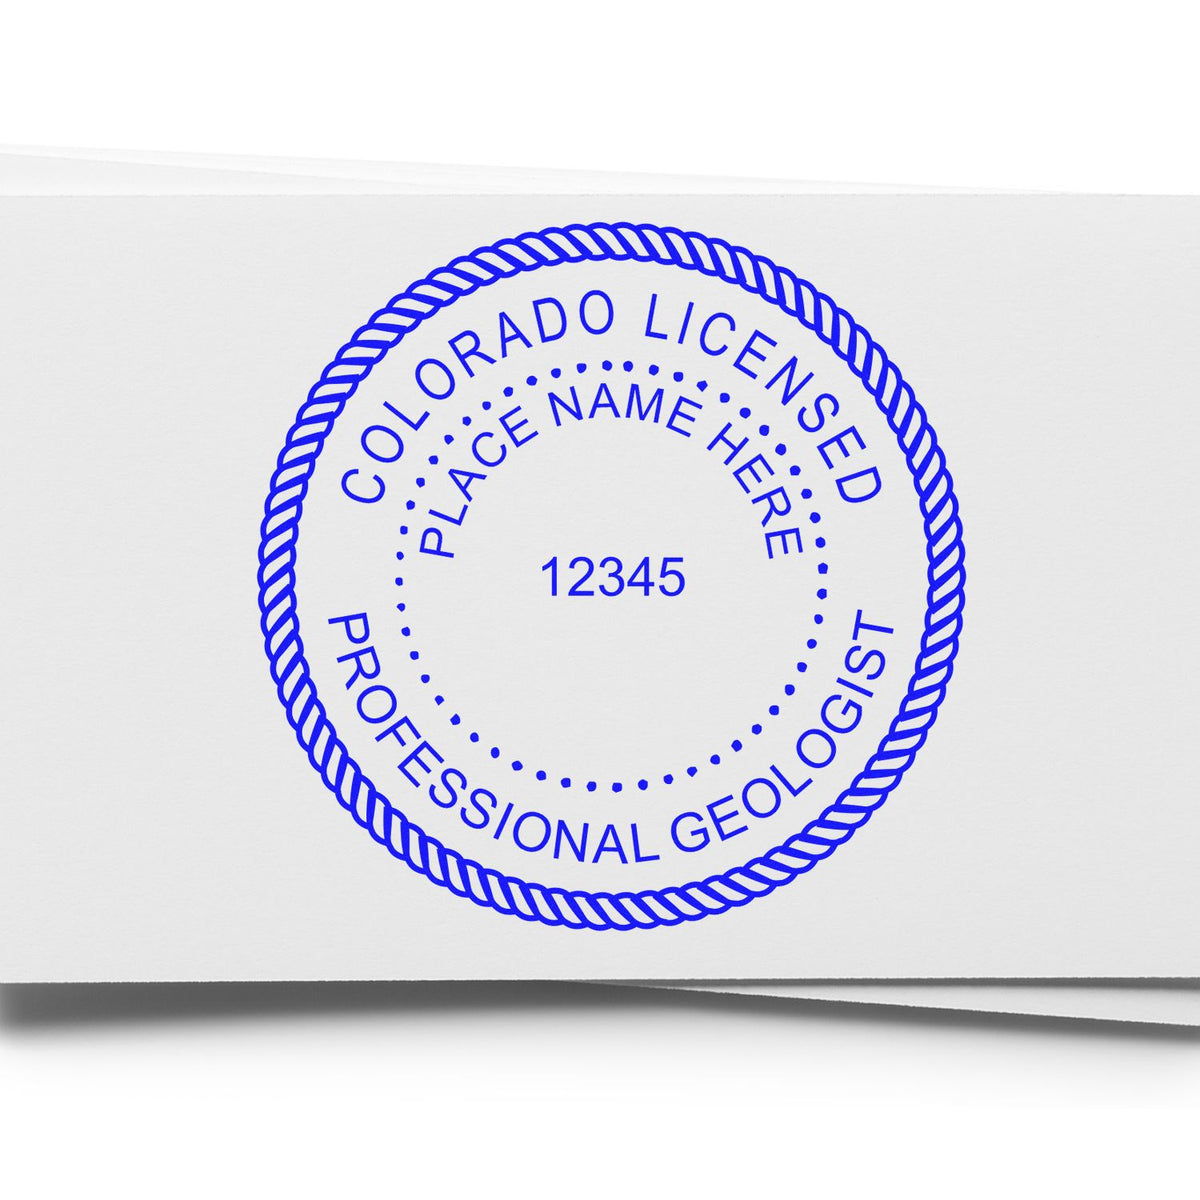 A stamped imprint of the Premium MaxLight Pre-Inked Colorado Geology Stamp in this stylish lifestyle photo, setting the tone for a unique and personalized product.